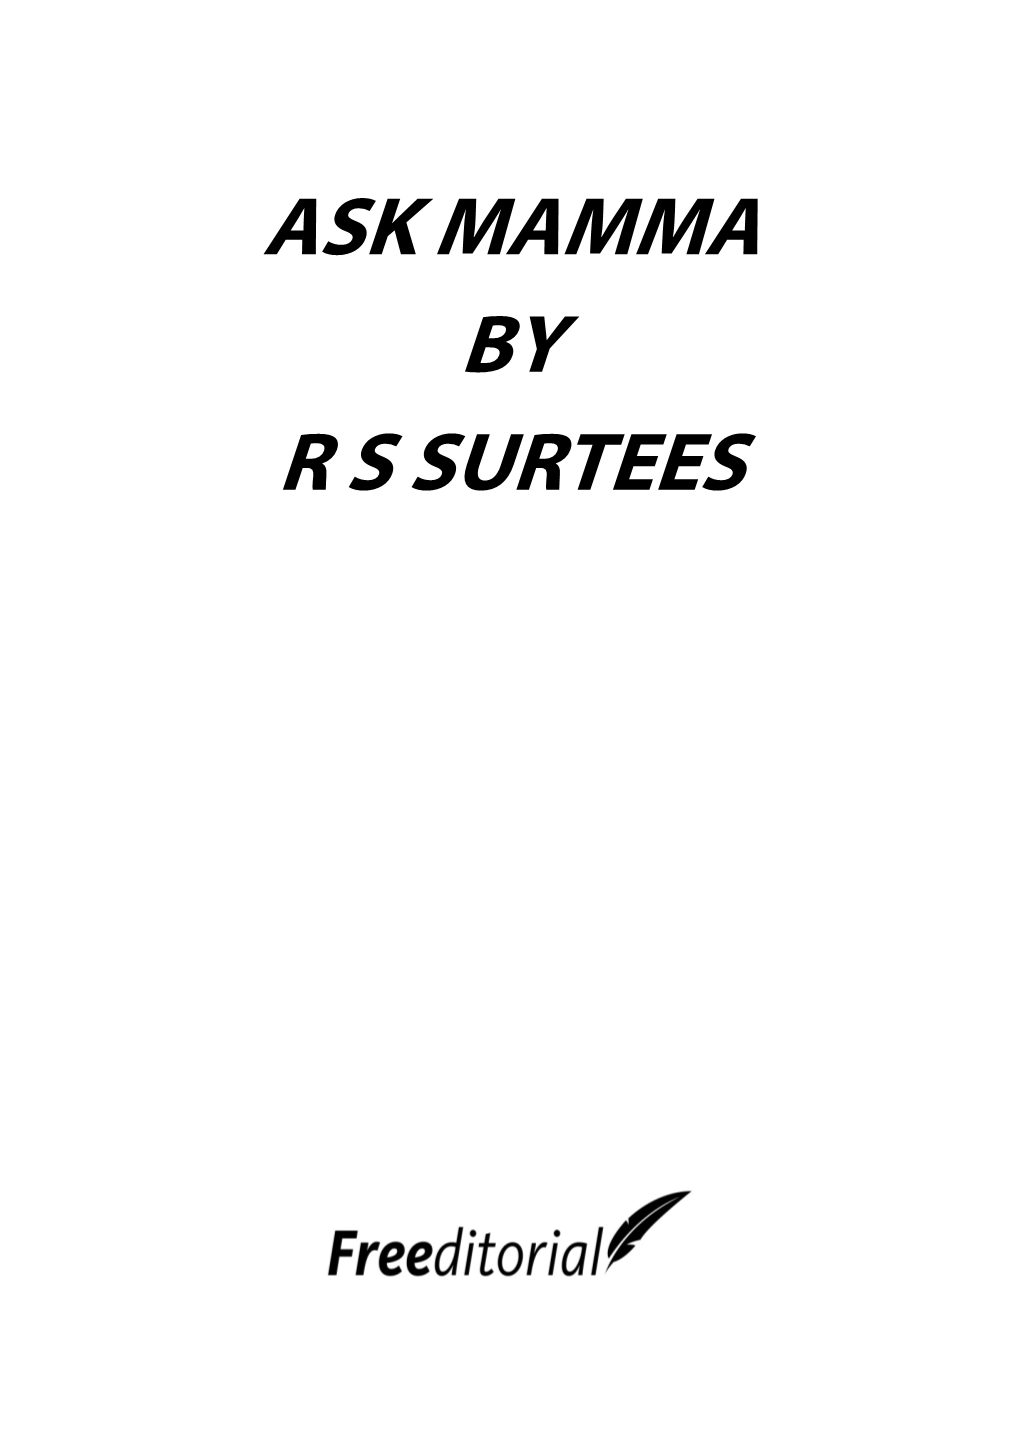 Ask Mamma by R S Surtees